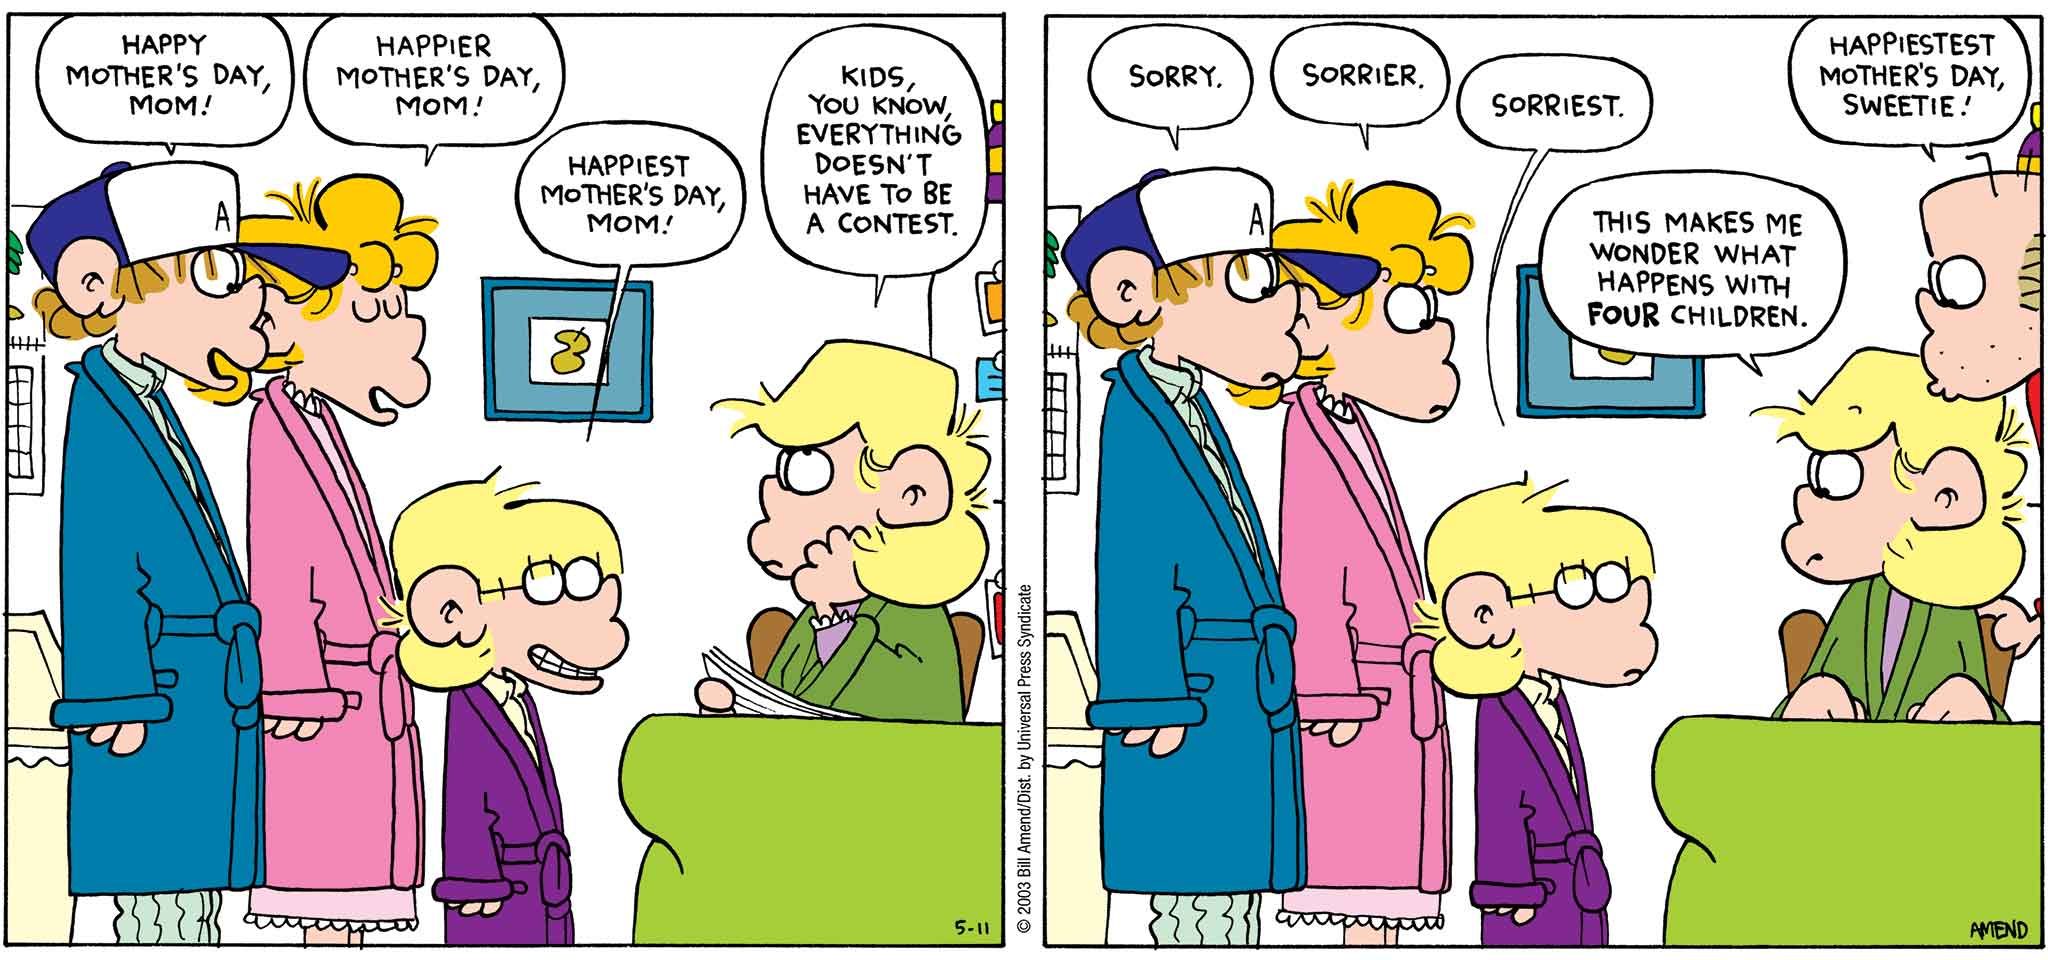 FoxTrot by Bill Amend - Mother's Day comic published May 11, 2003 - Peter: Happy Mother's Day, mom! Paige: Happier Mother's Day, mom! Jason: Happiest Mother's Day, mom! Andy: Kids, you know everything doesn't have to be a contest. Peter: Sorry. Paige: Sorrier. Jason: Sorriest. Andy: This makes me wonder what happens with four children. Roger: Happiestest Mother's Day, sweetie!